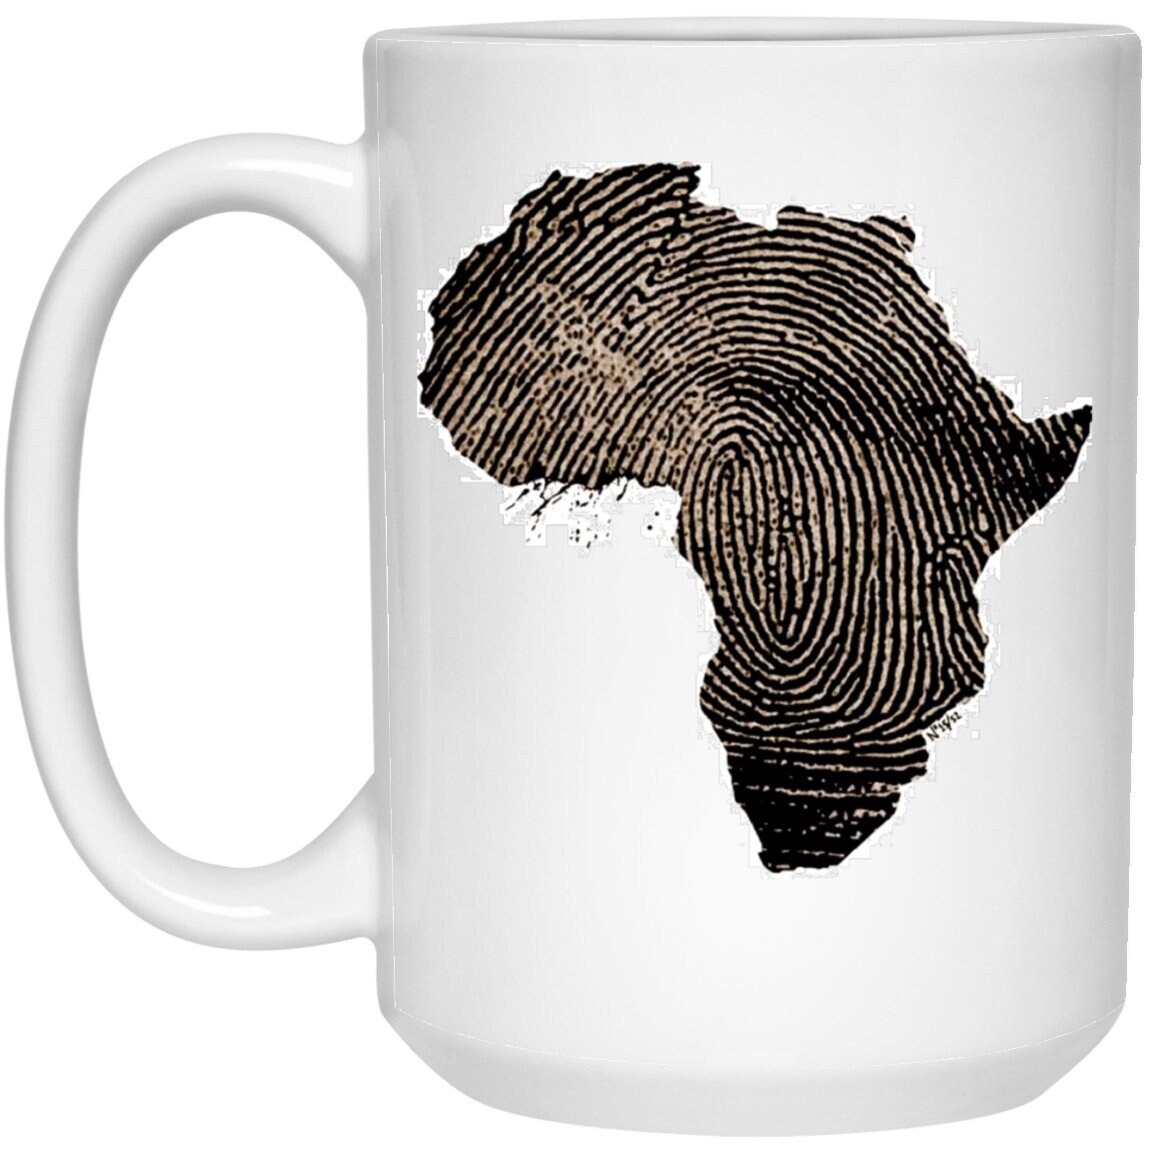 White Ceramic Coffee Tea Mug is part of Old Tortuga's Sweet Life Collection offered through Mugs4YourSoul Africa 15 oz